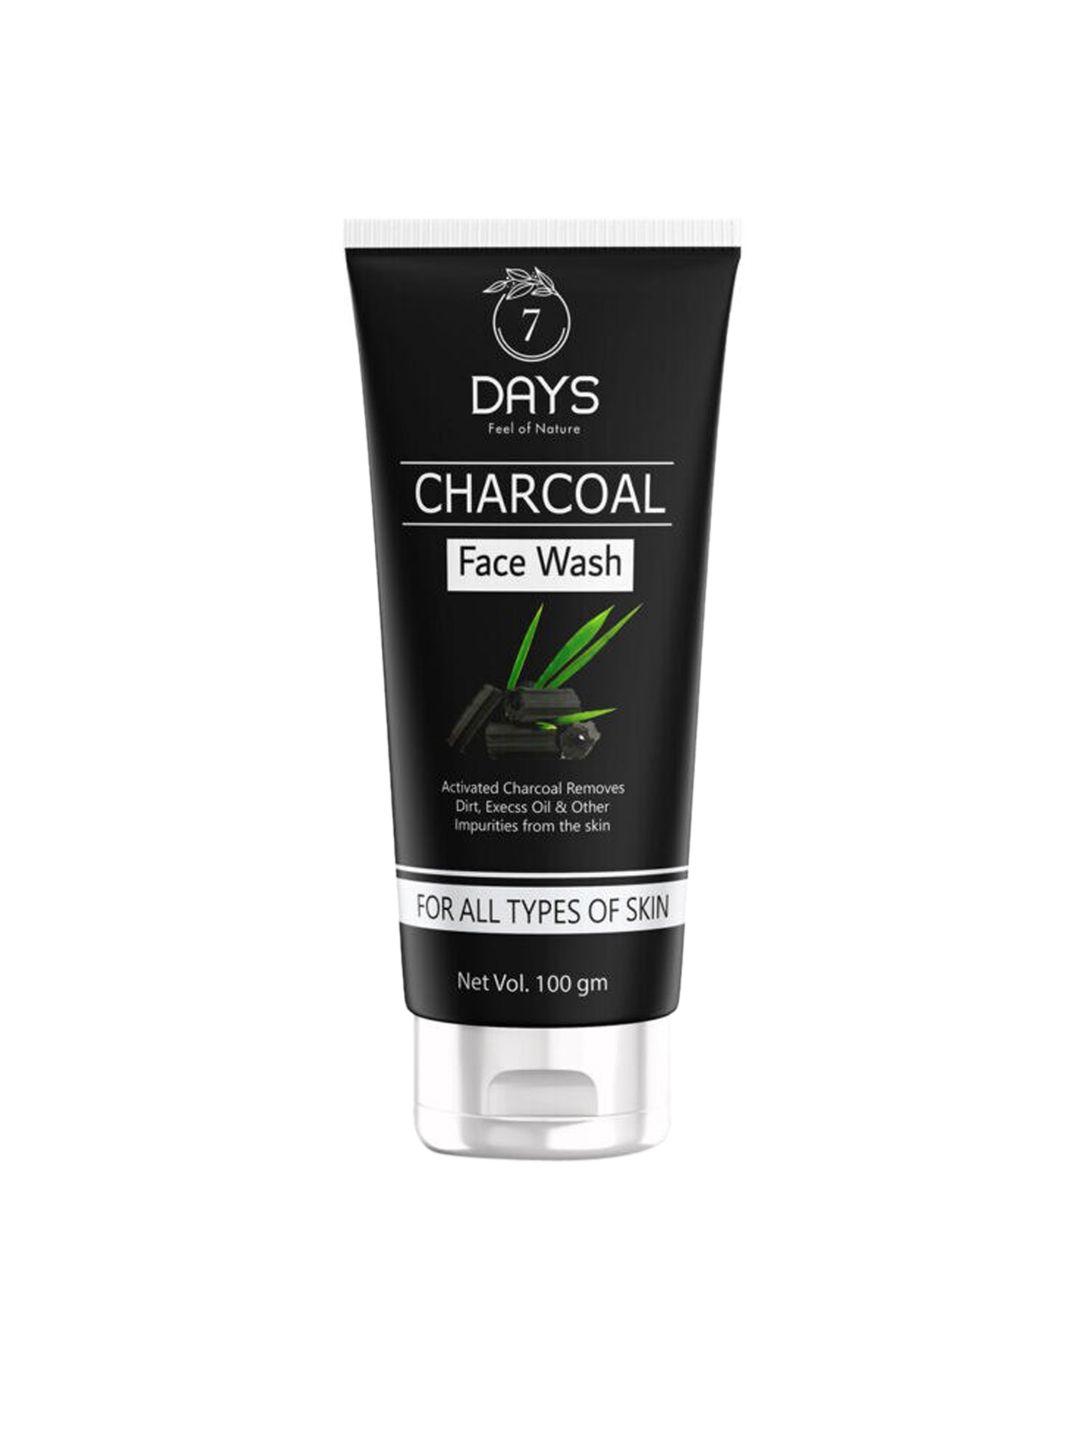 7 days black charcoal face wash 100gm